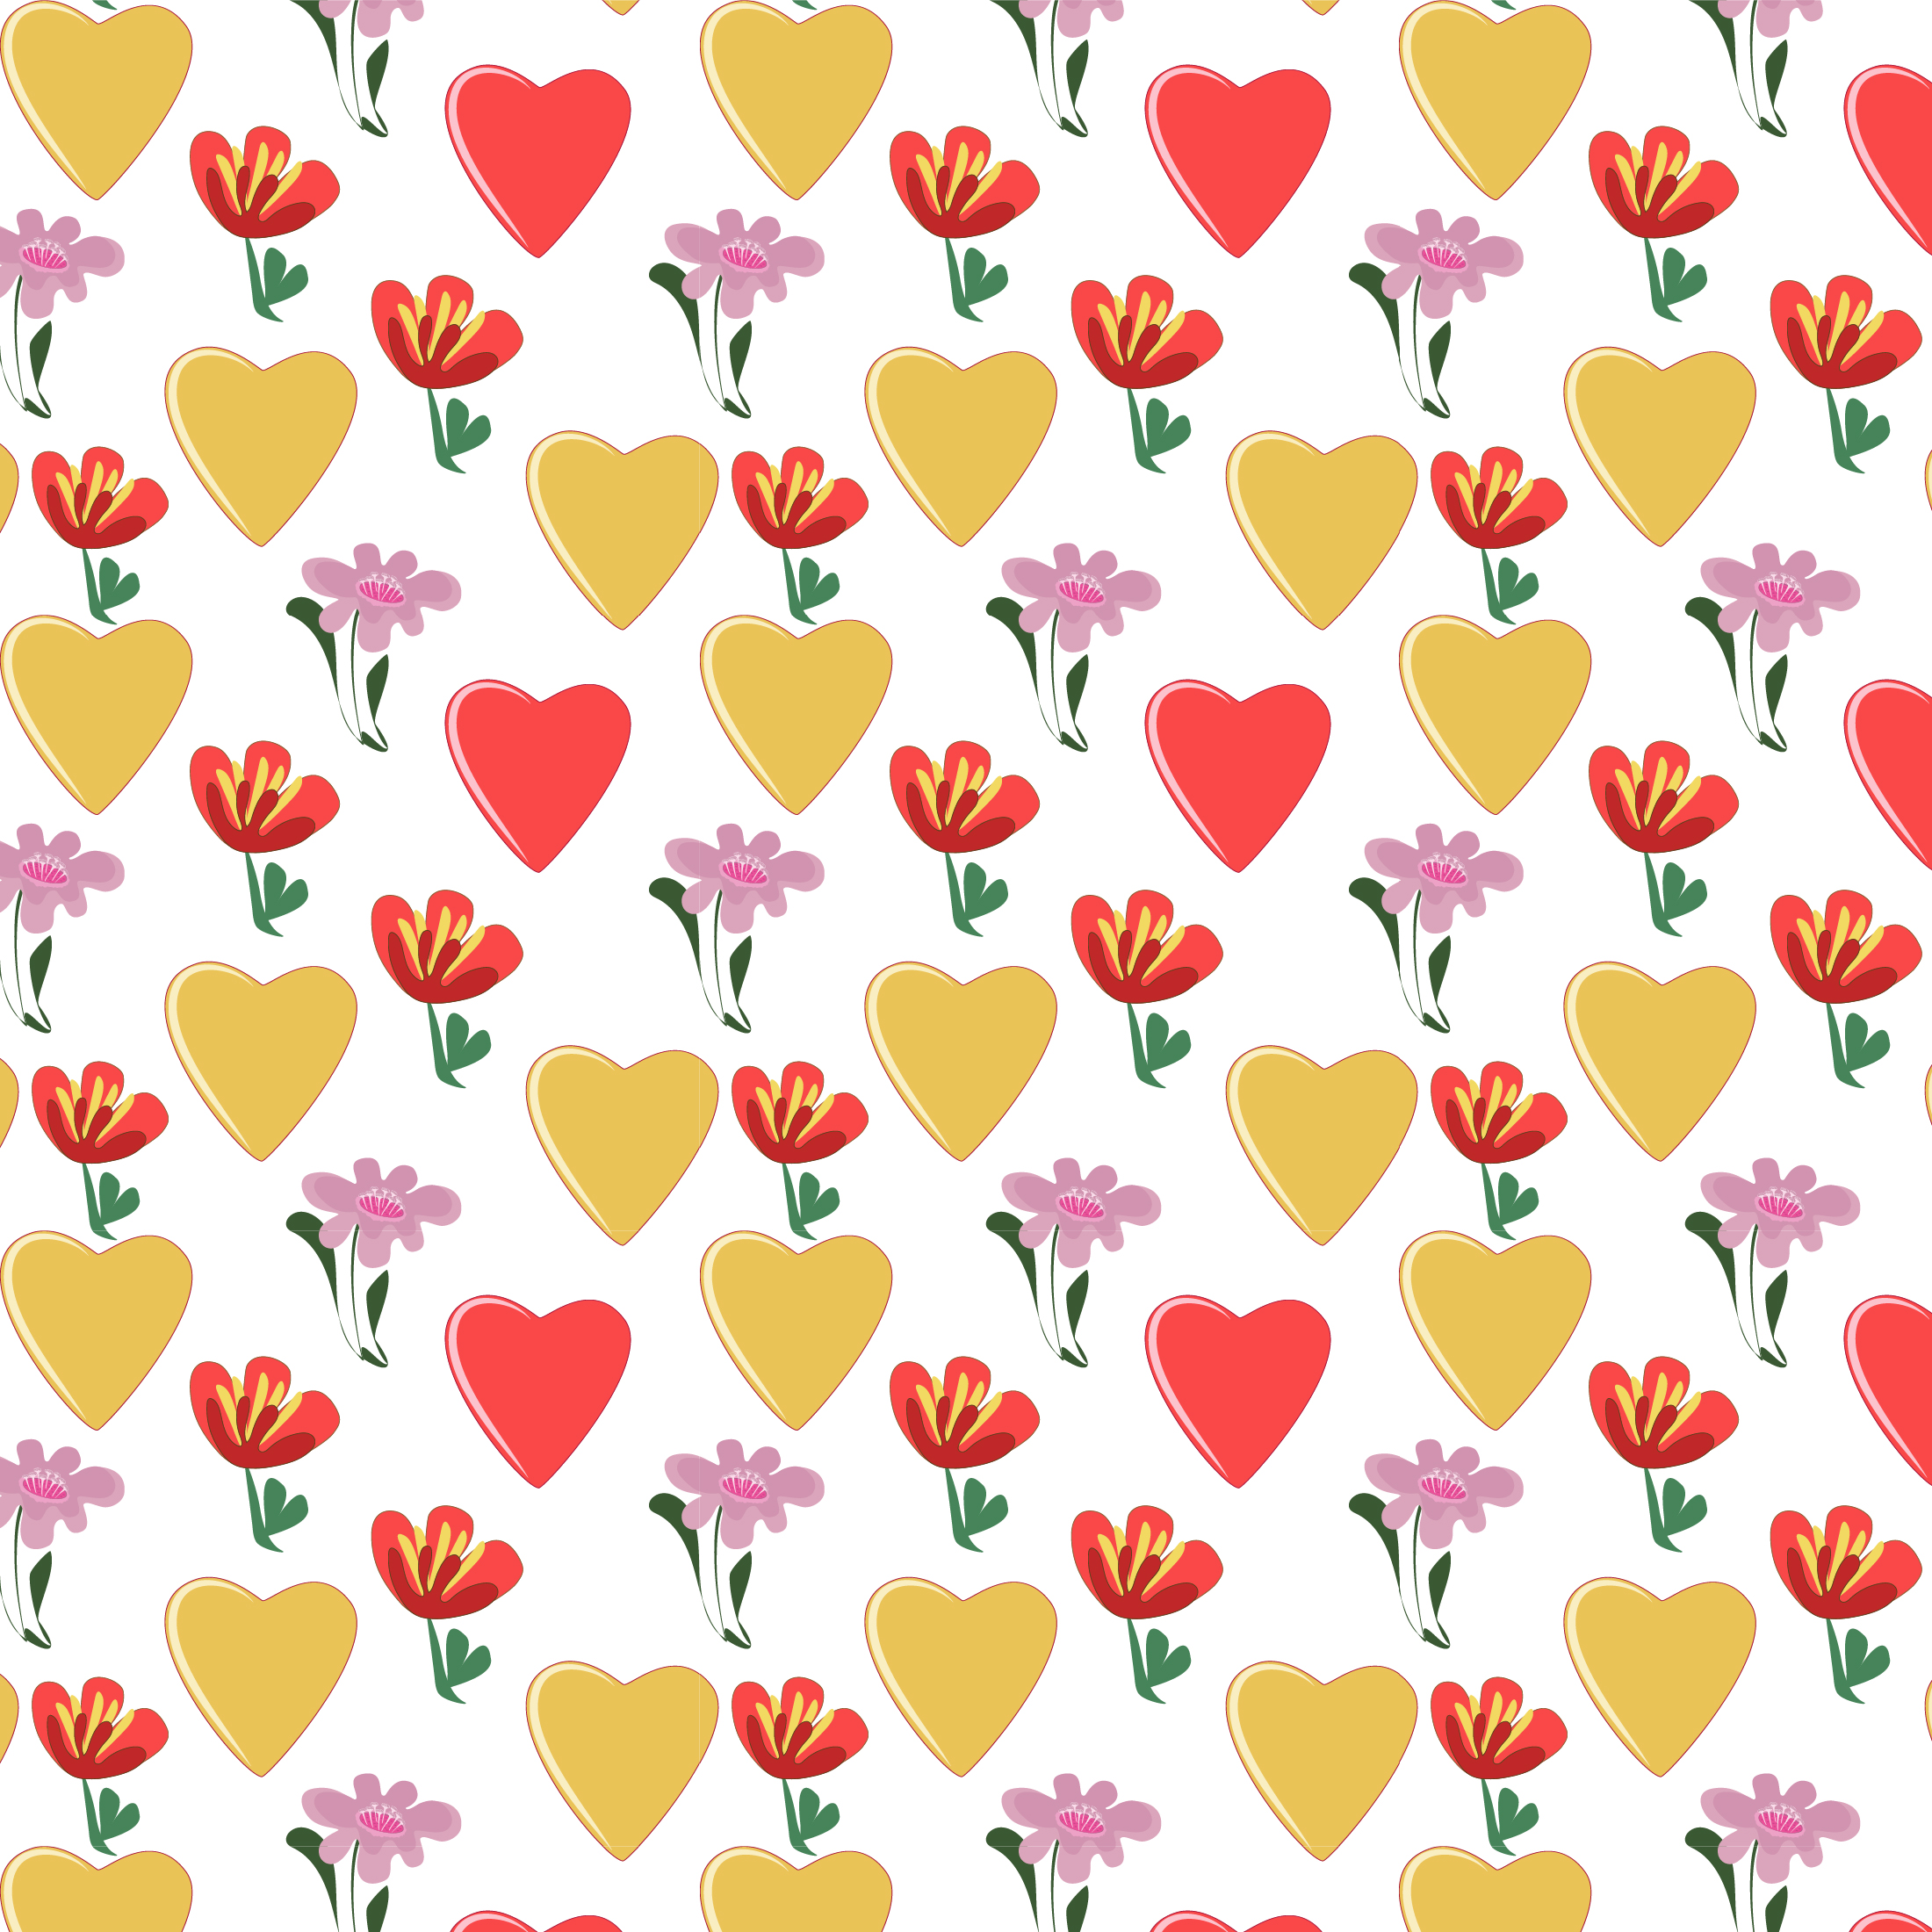 Pattern with hearts and stylized flowers 01